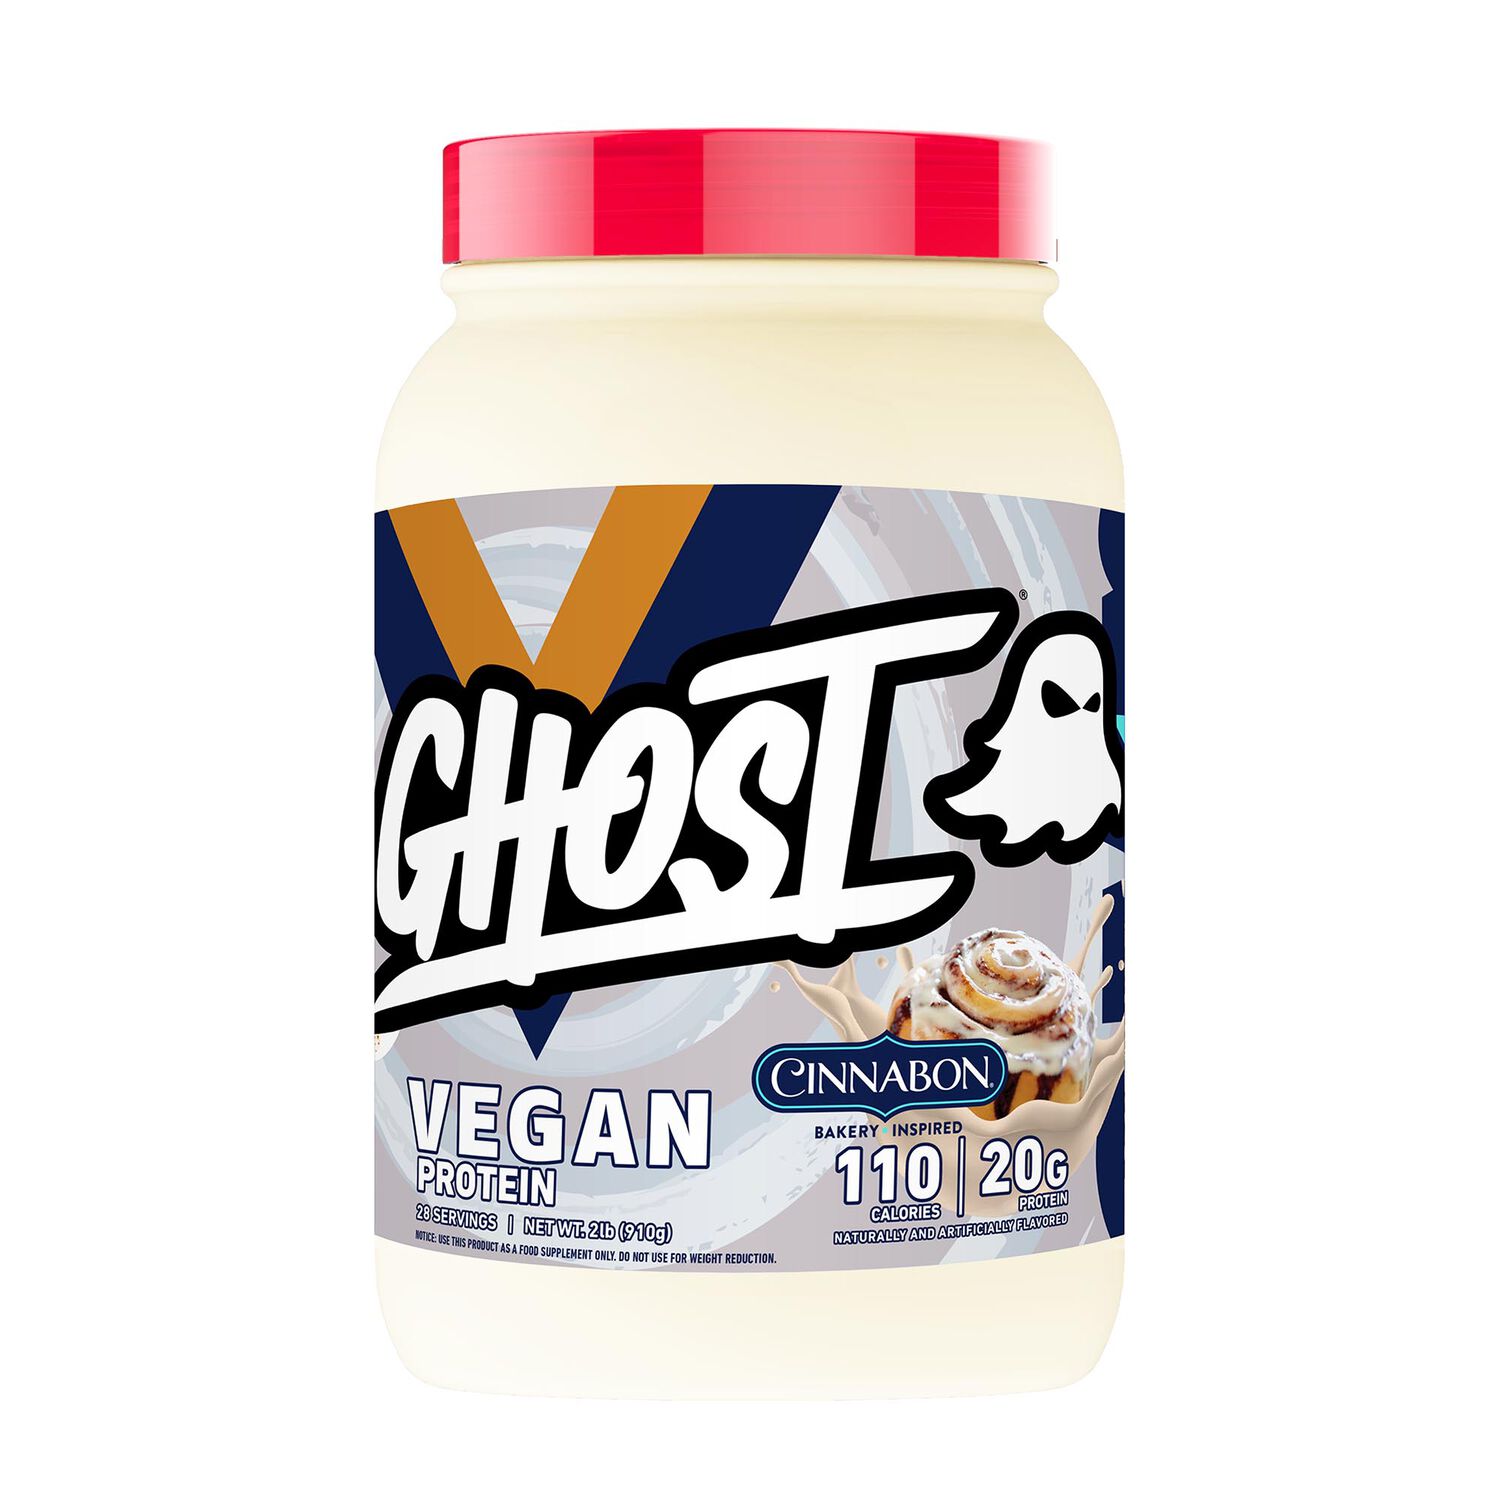 6 of the best Ghost pre-workout flavors - When Women Inspire